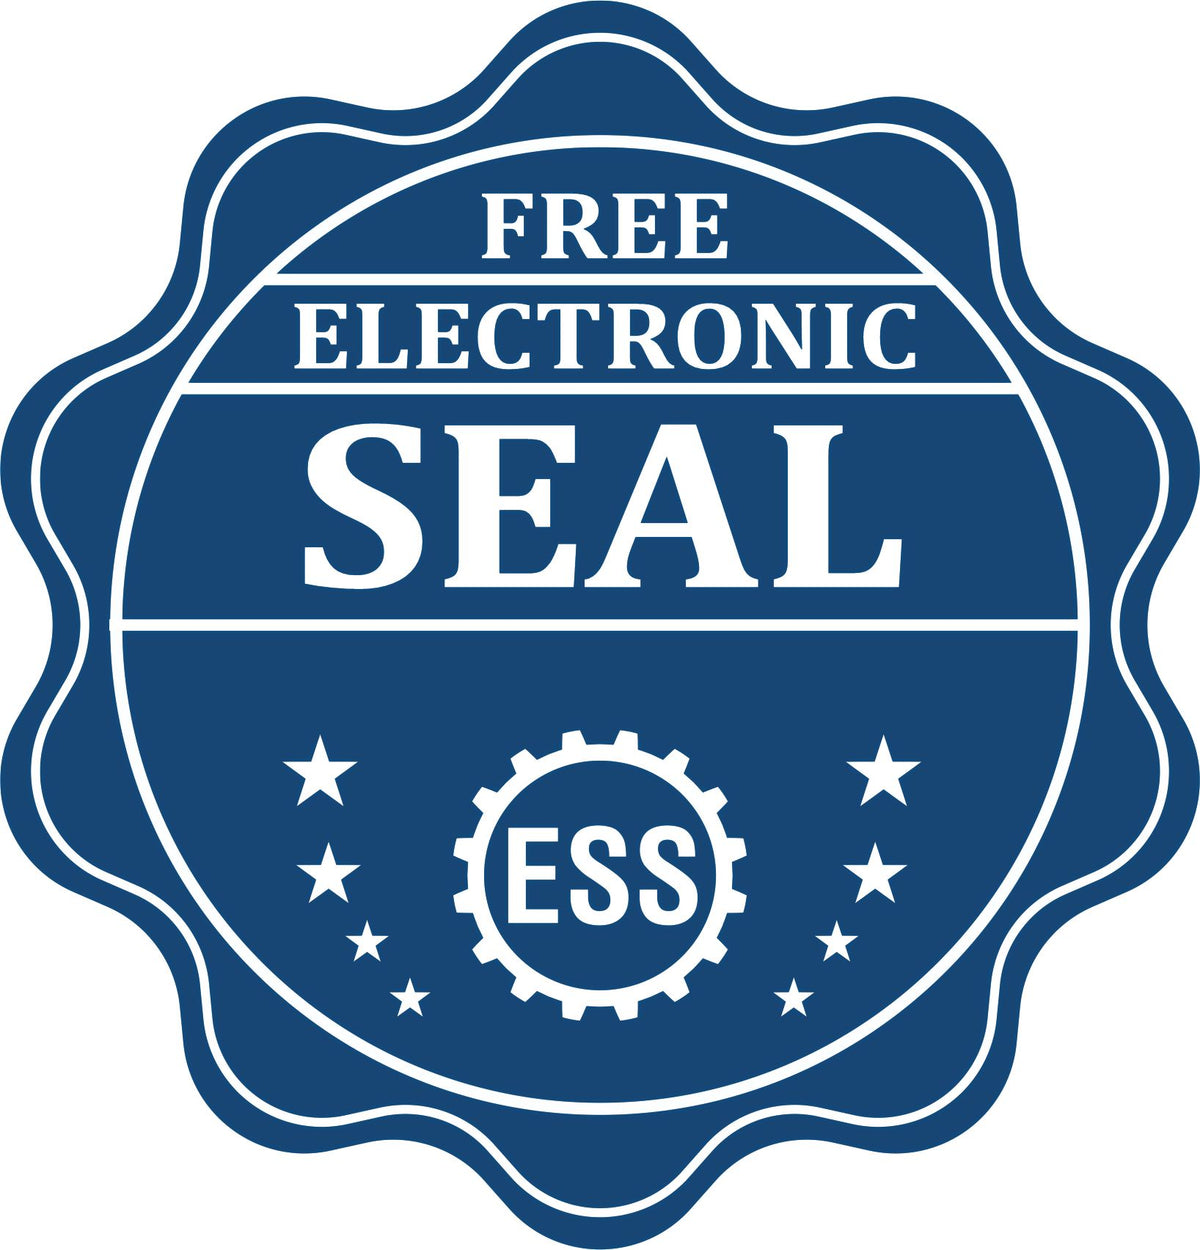 A badge showing a free electronic seal for the Gift Delaware Geologist Seal with stars and the ESS gear on the emblem.